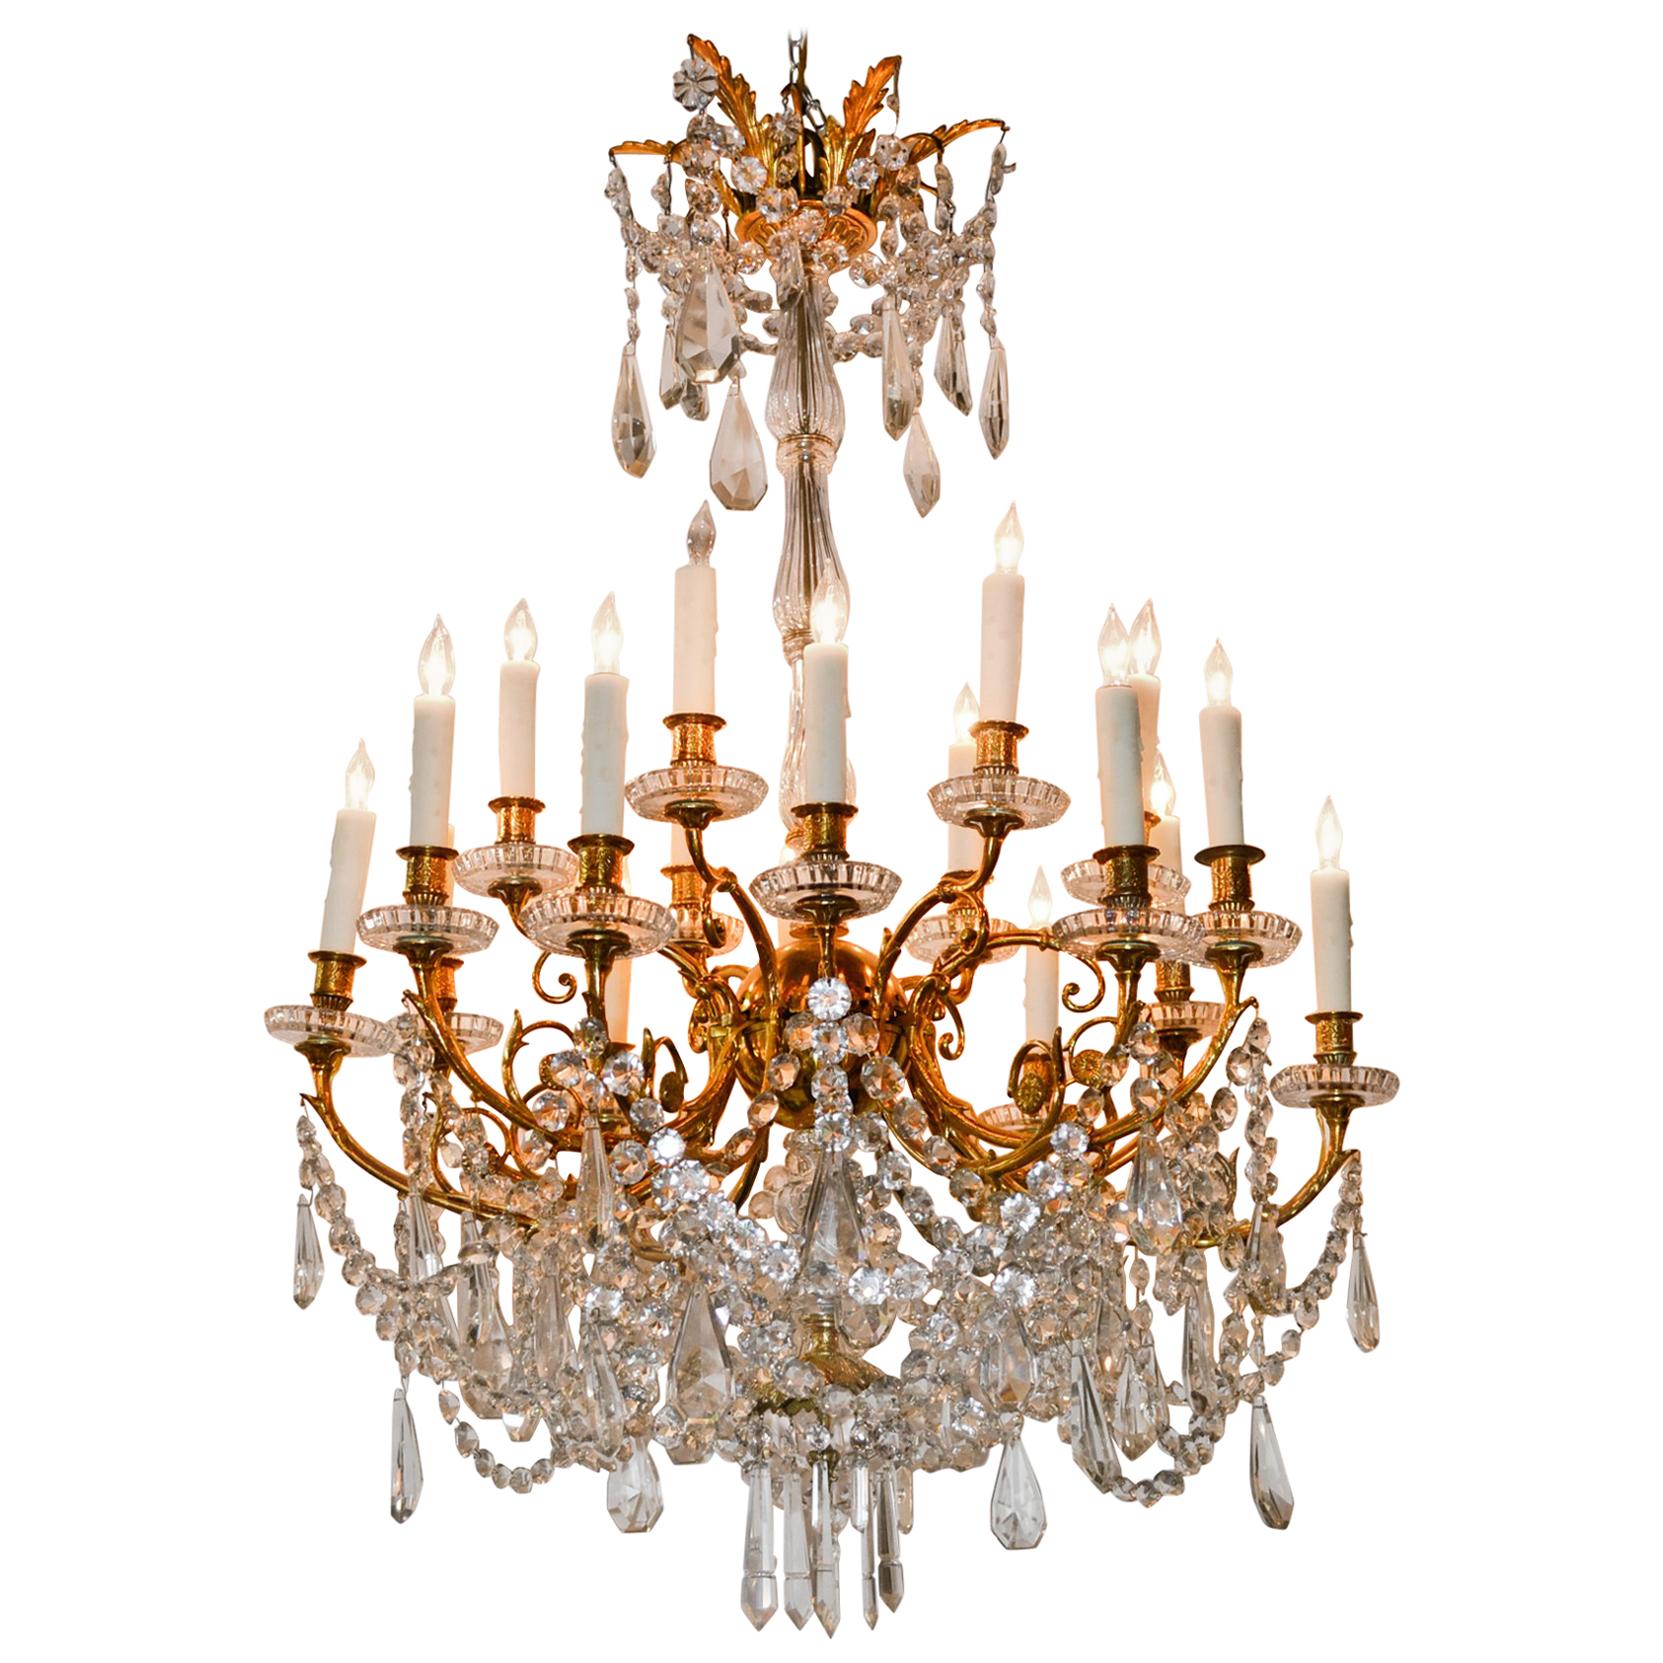 19th Century French Baccarat Chandelier